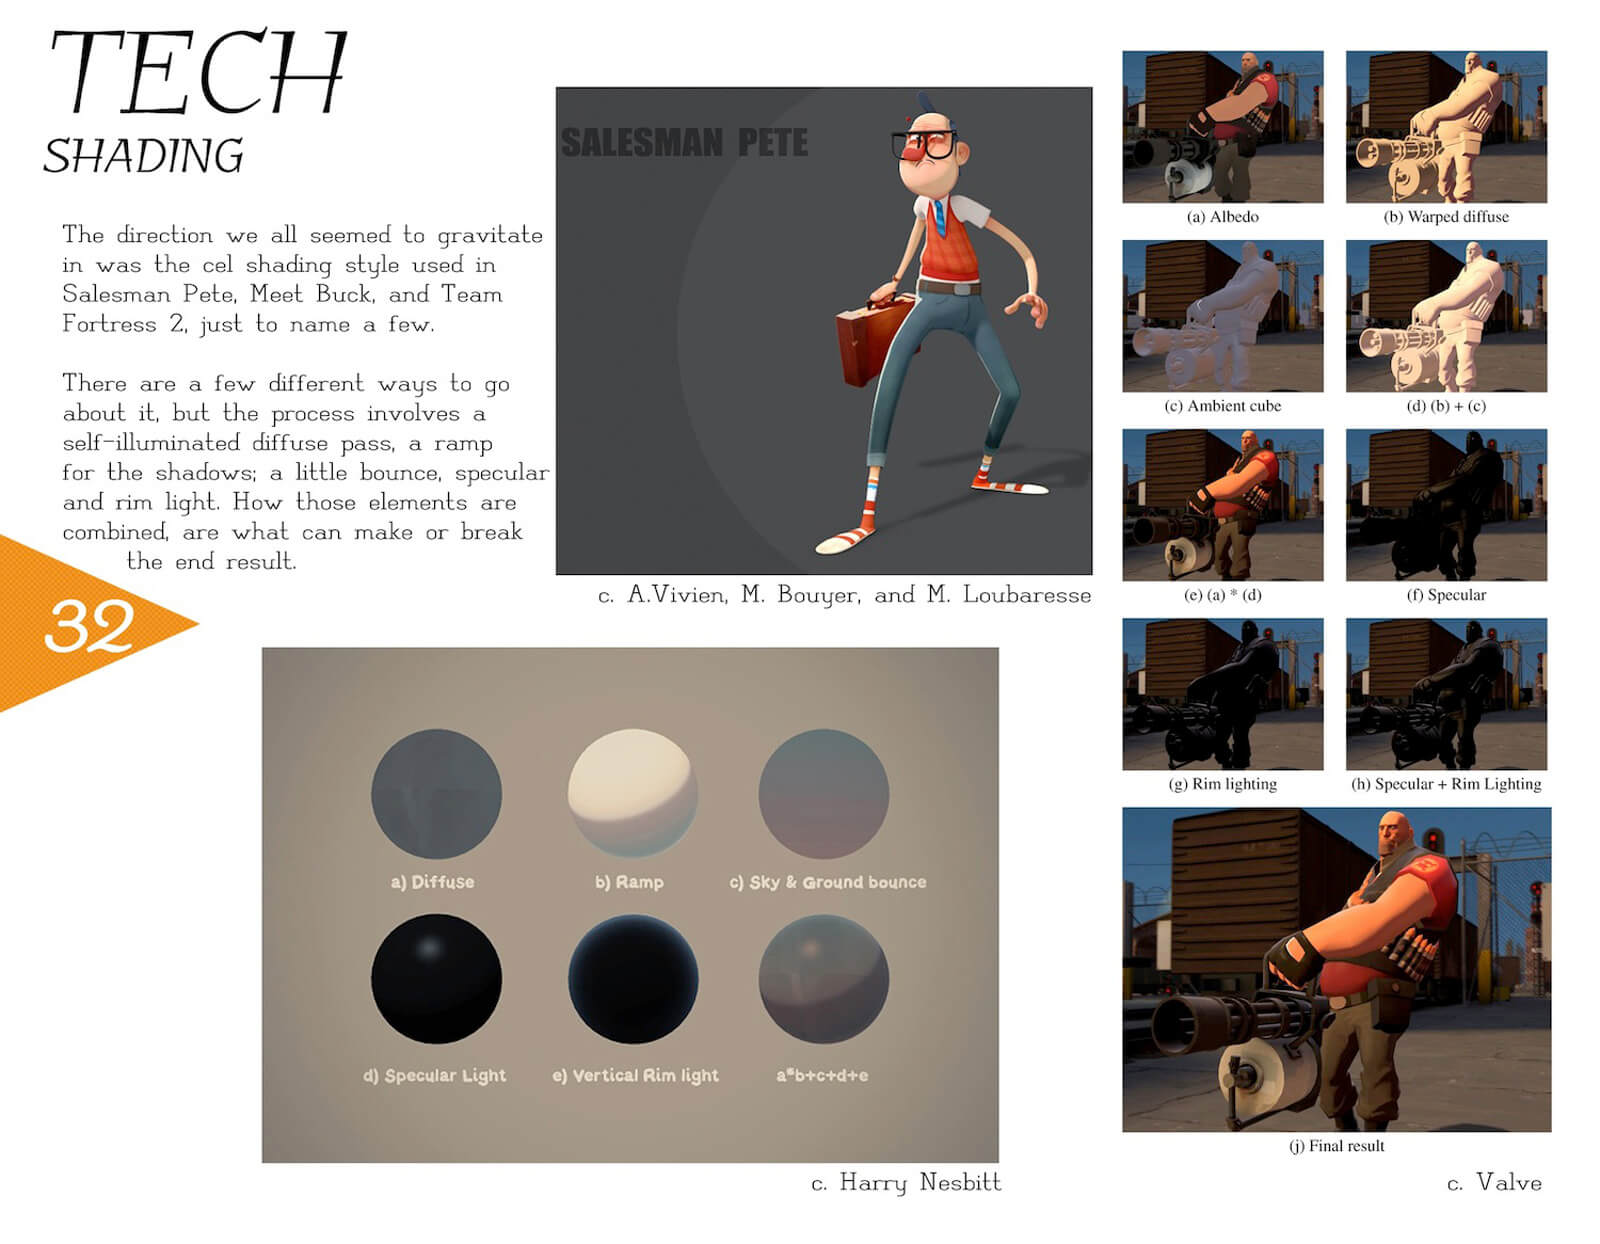 Shading slide for the film Super Secret describing the various shading effects at work on the characters